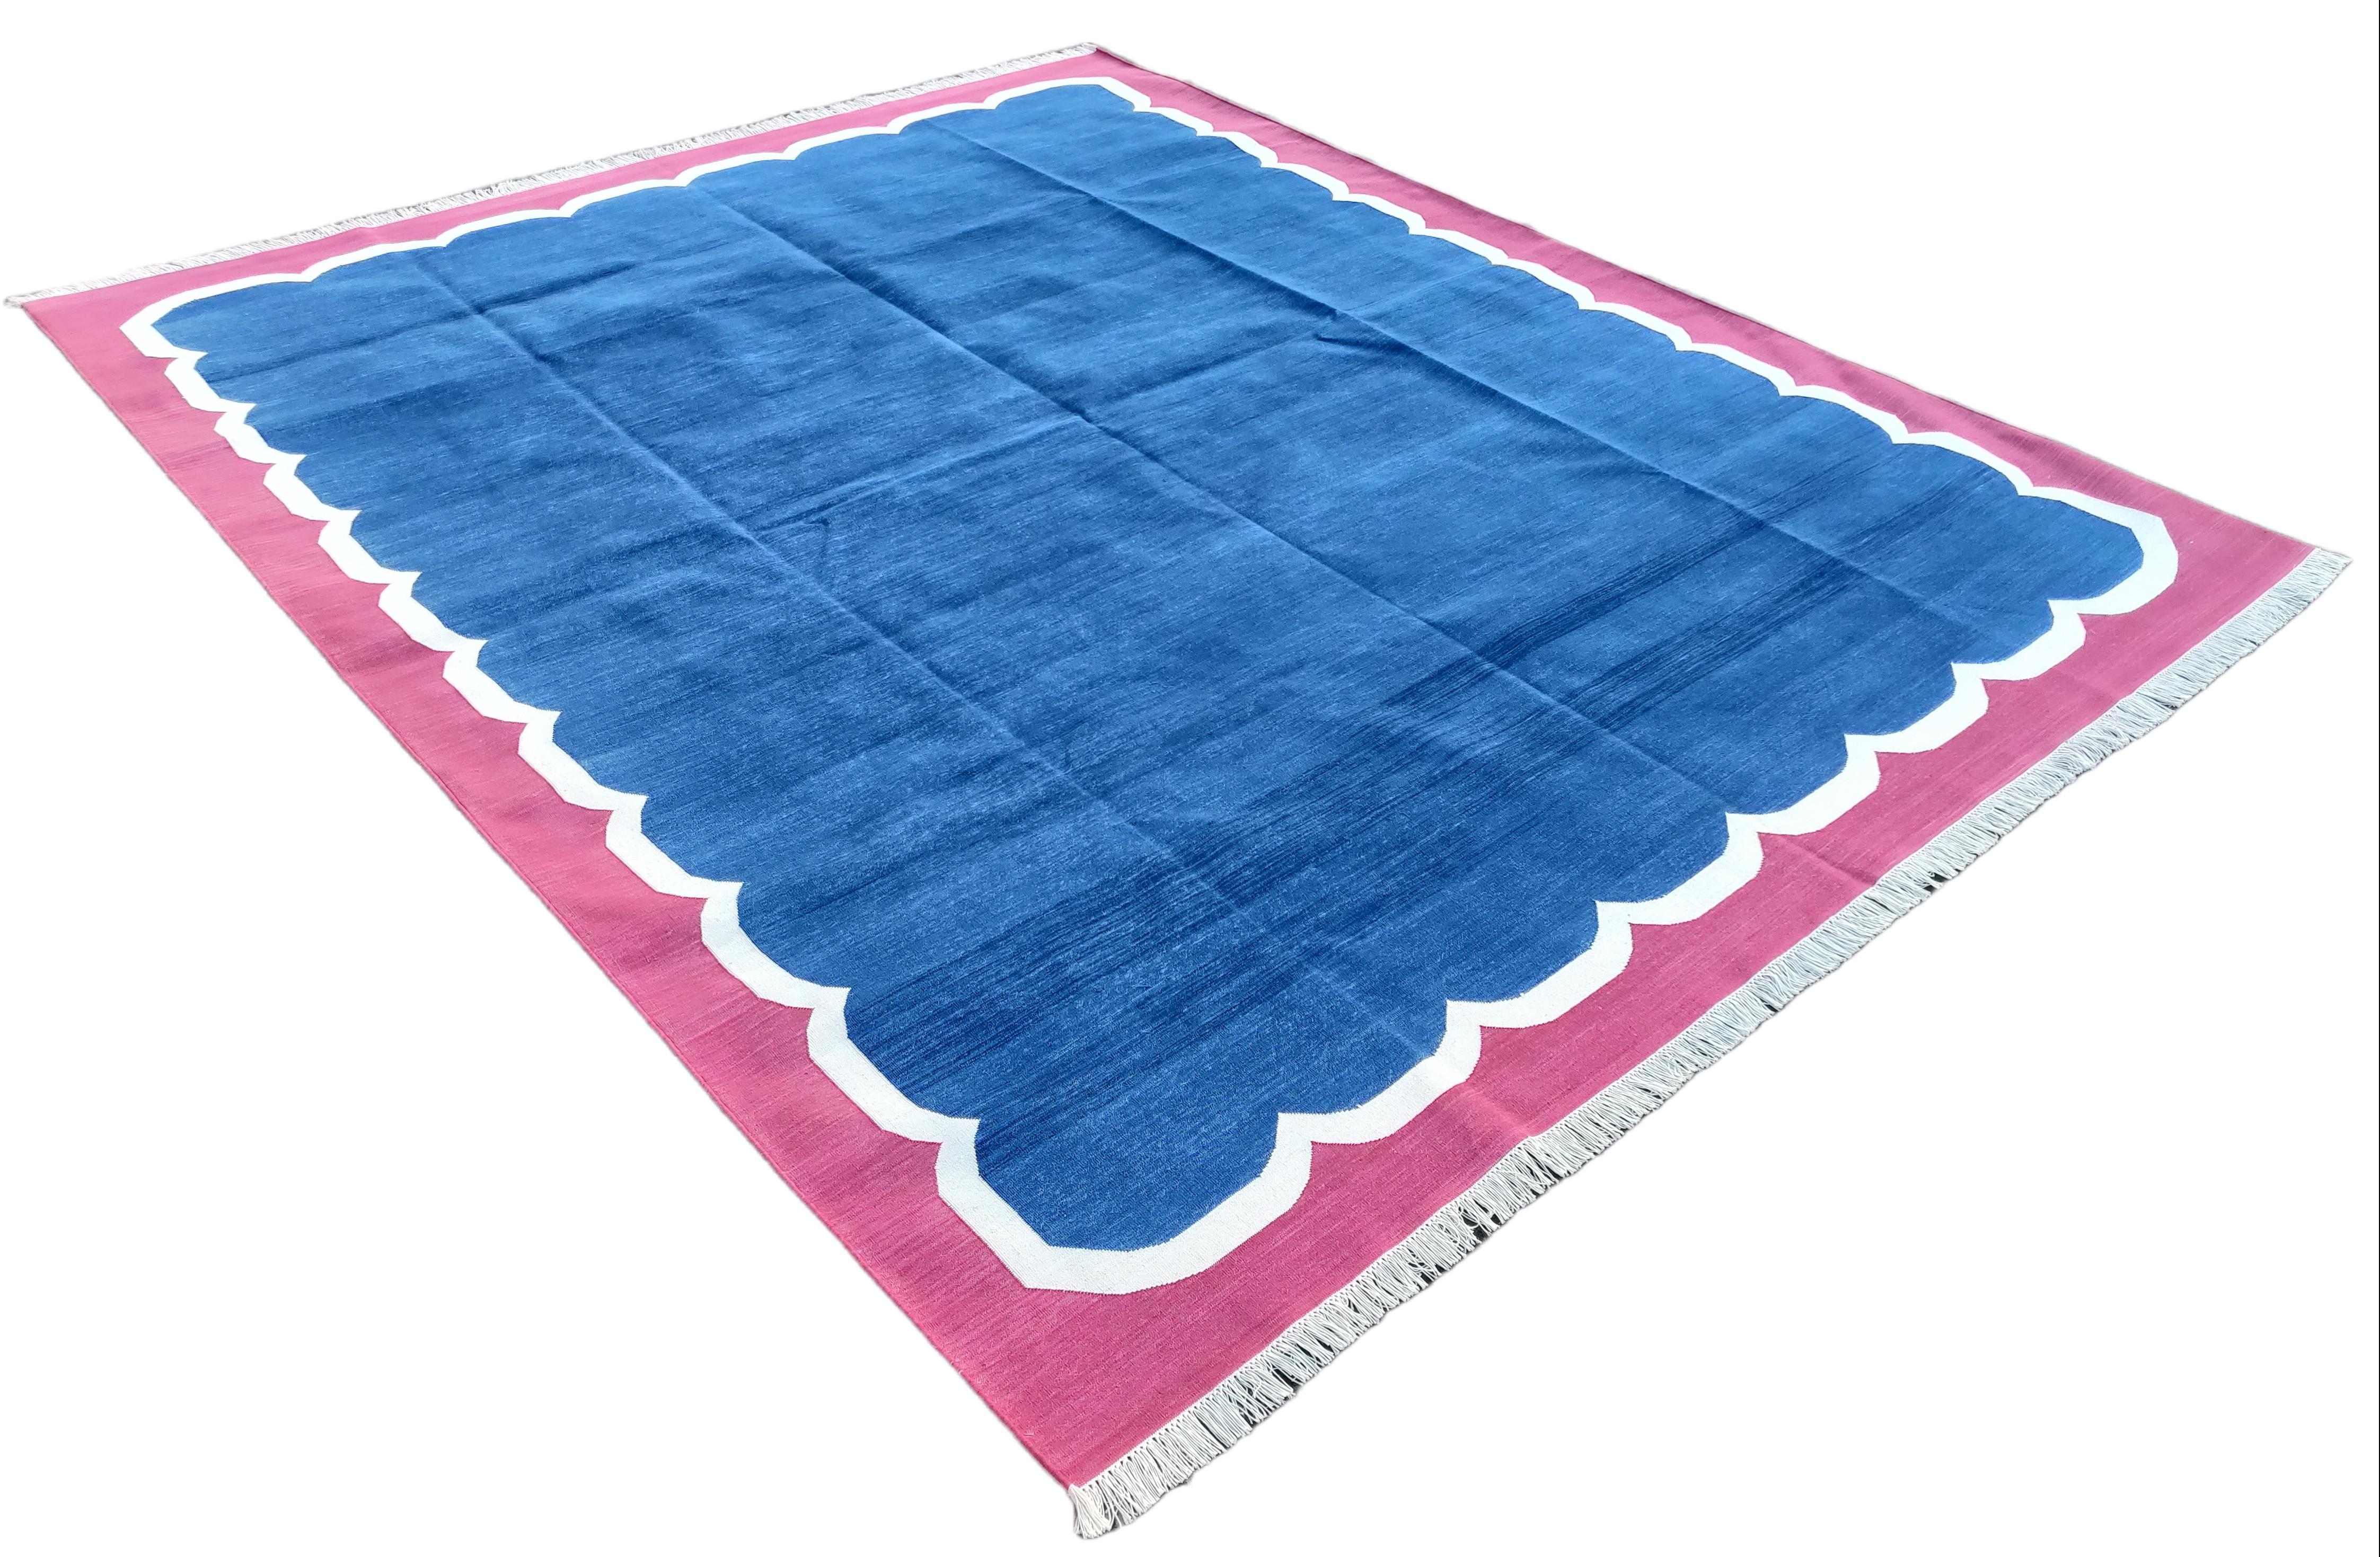 Cotton Vegetable Dyed Navy Blue And Raspberry Pink Scalloped Striped Indian Dhurrie Rug-8'x10' 
These special flat-weave dhurries are hand-woven with 15 ply 100% cotton yarn. Due to the special manufacturing techniques used to create our rugs, the